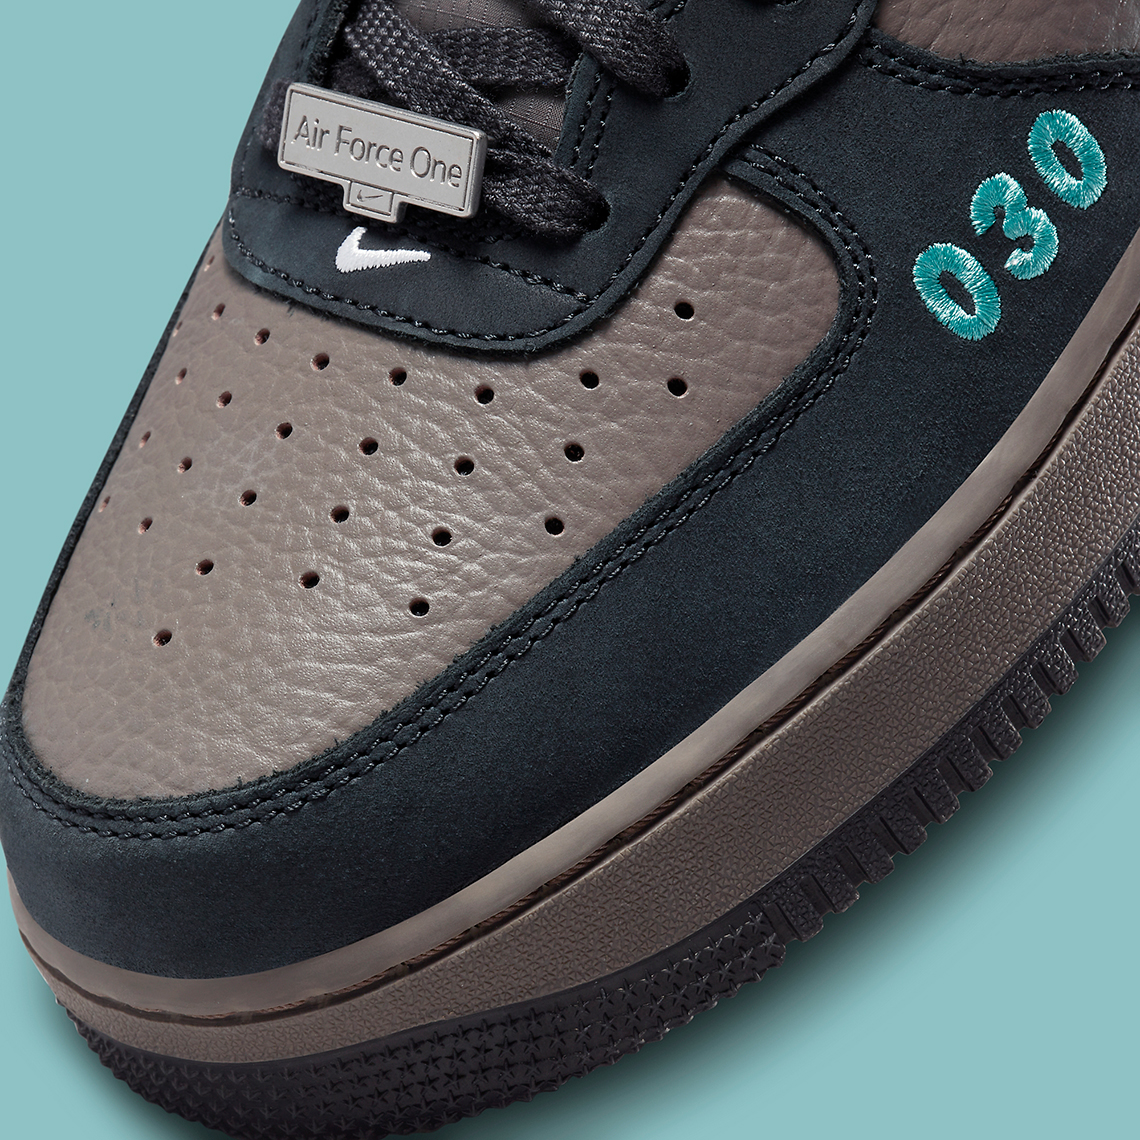 nike stash air force 1 release form template Mid Berlin Dr0296 200 6